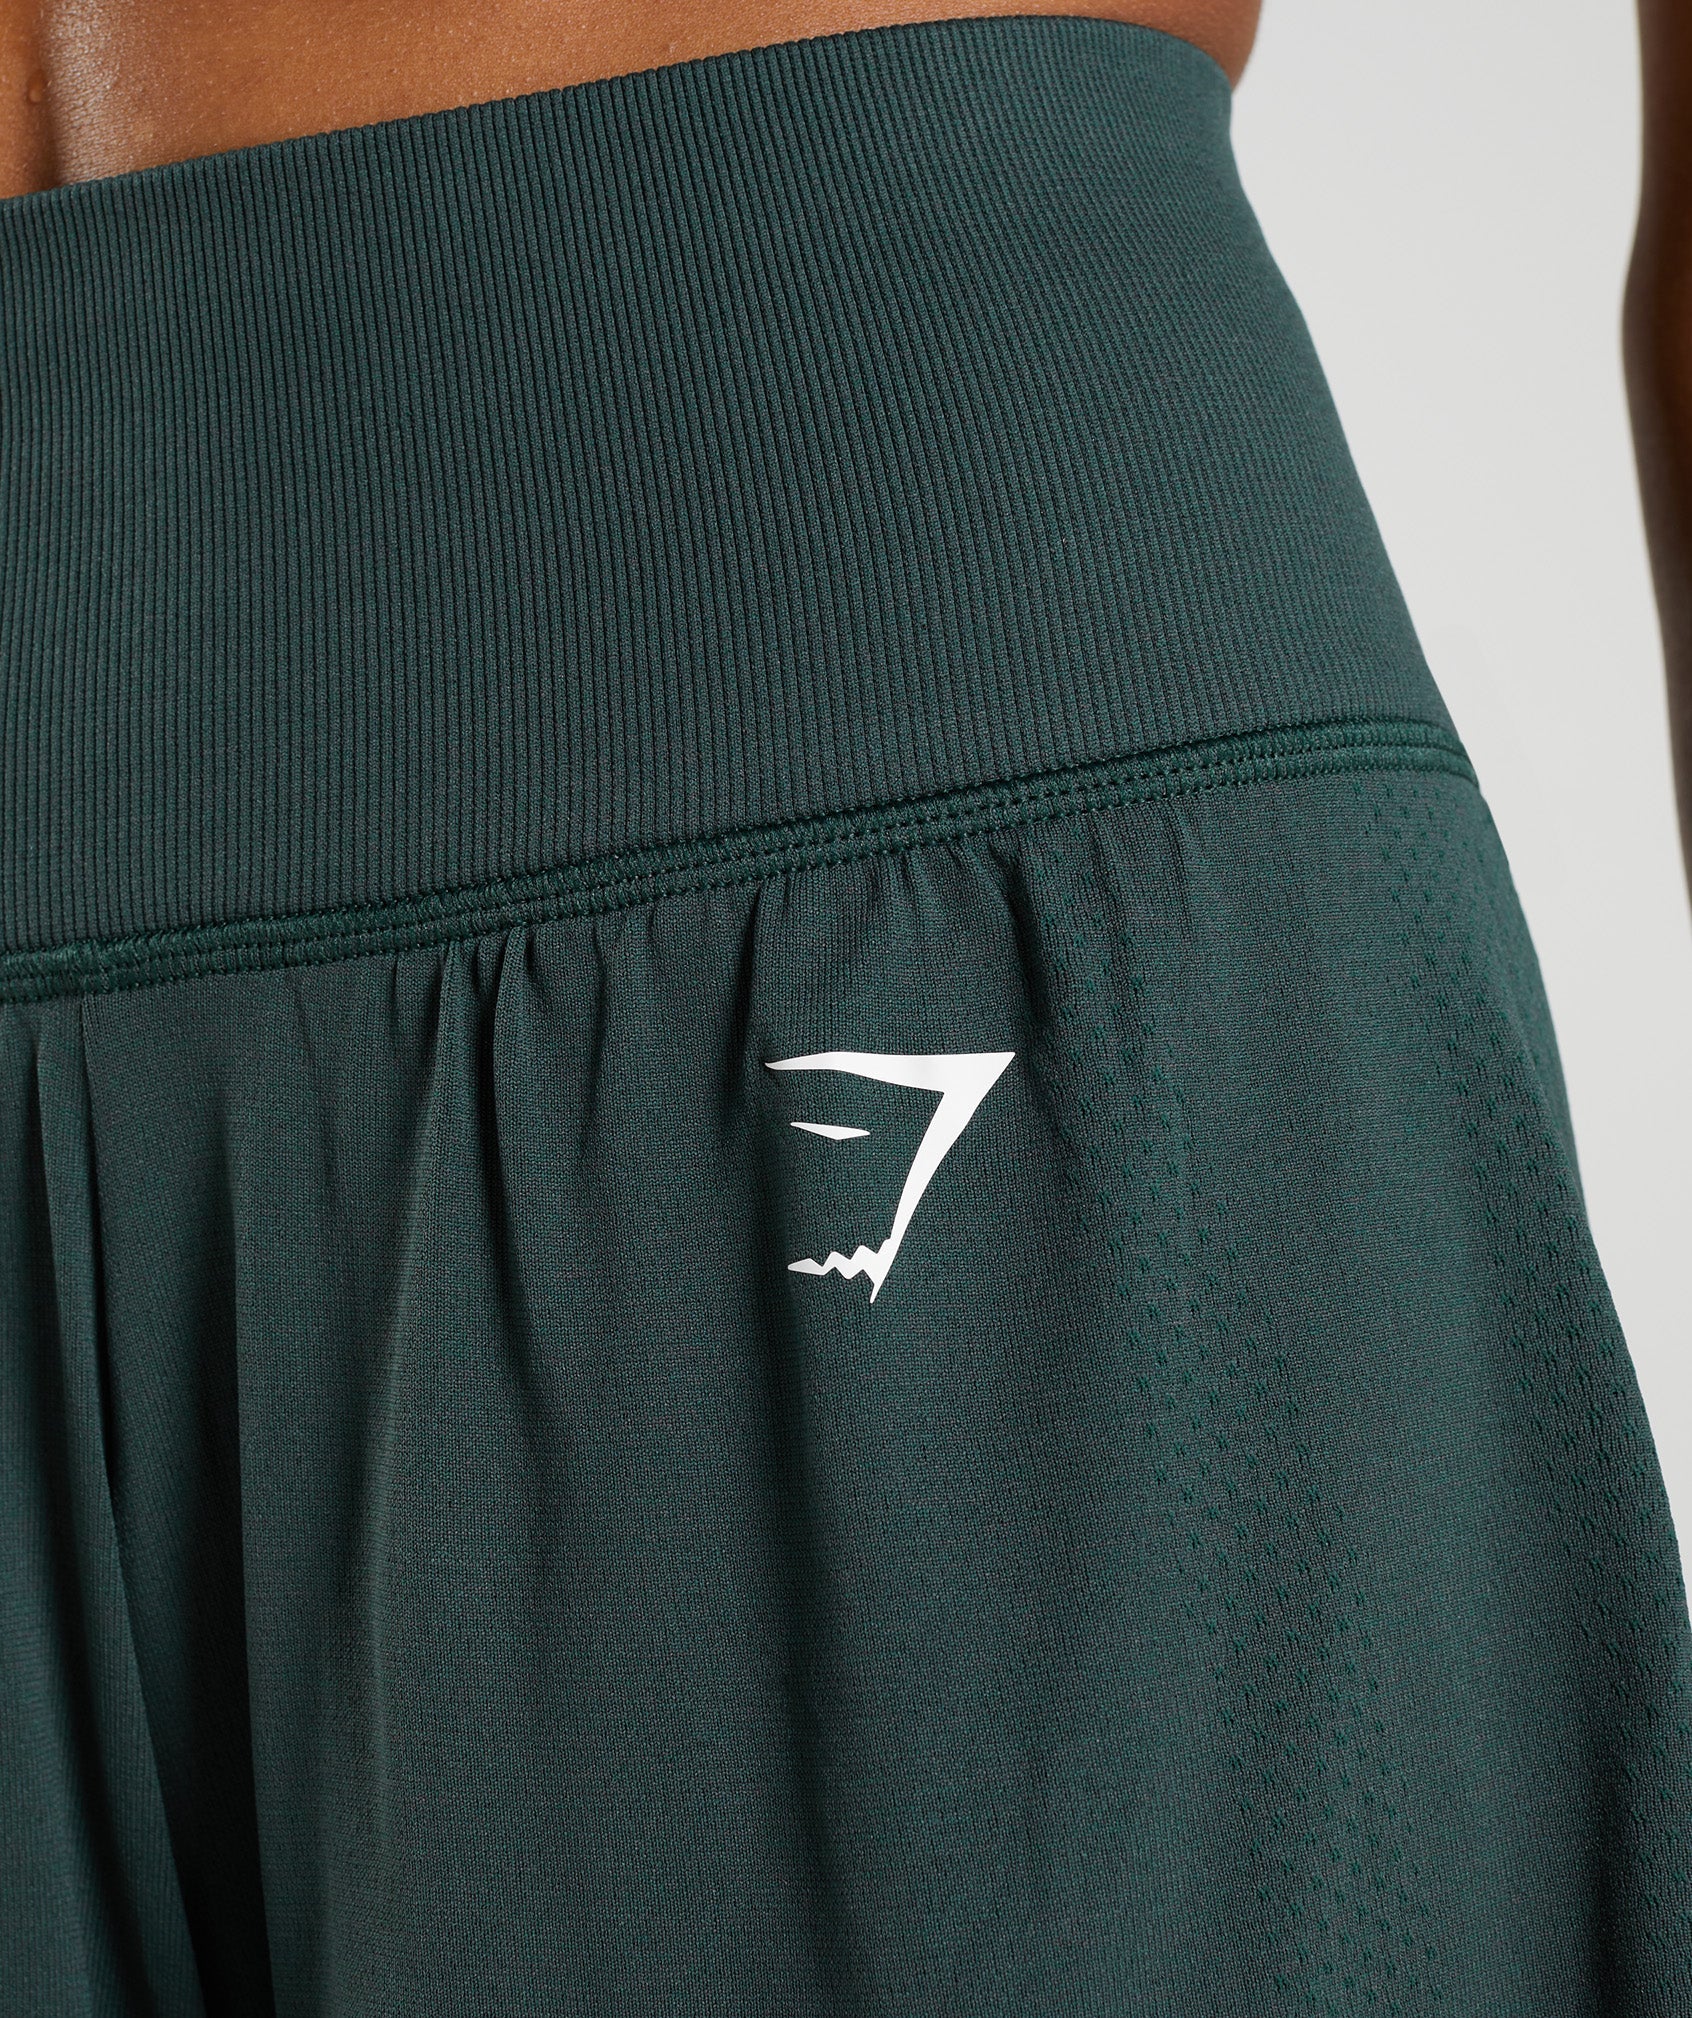 Vital Seamless 2.0 2-in-1 Shorts in Woodland Green/ Marl - view 6